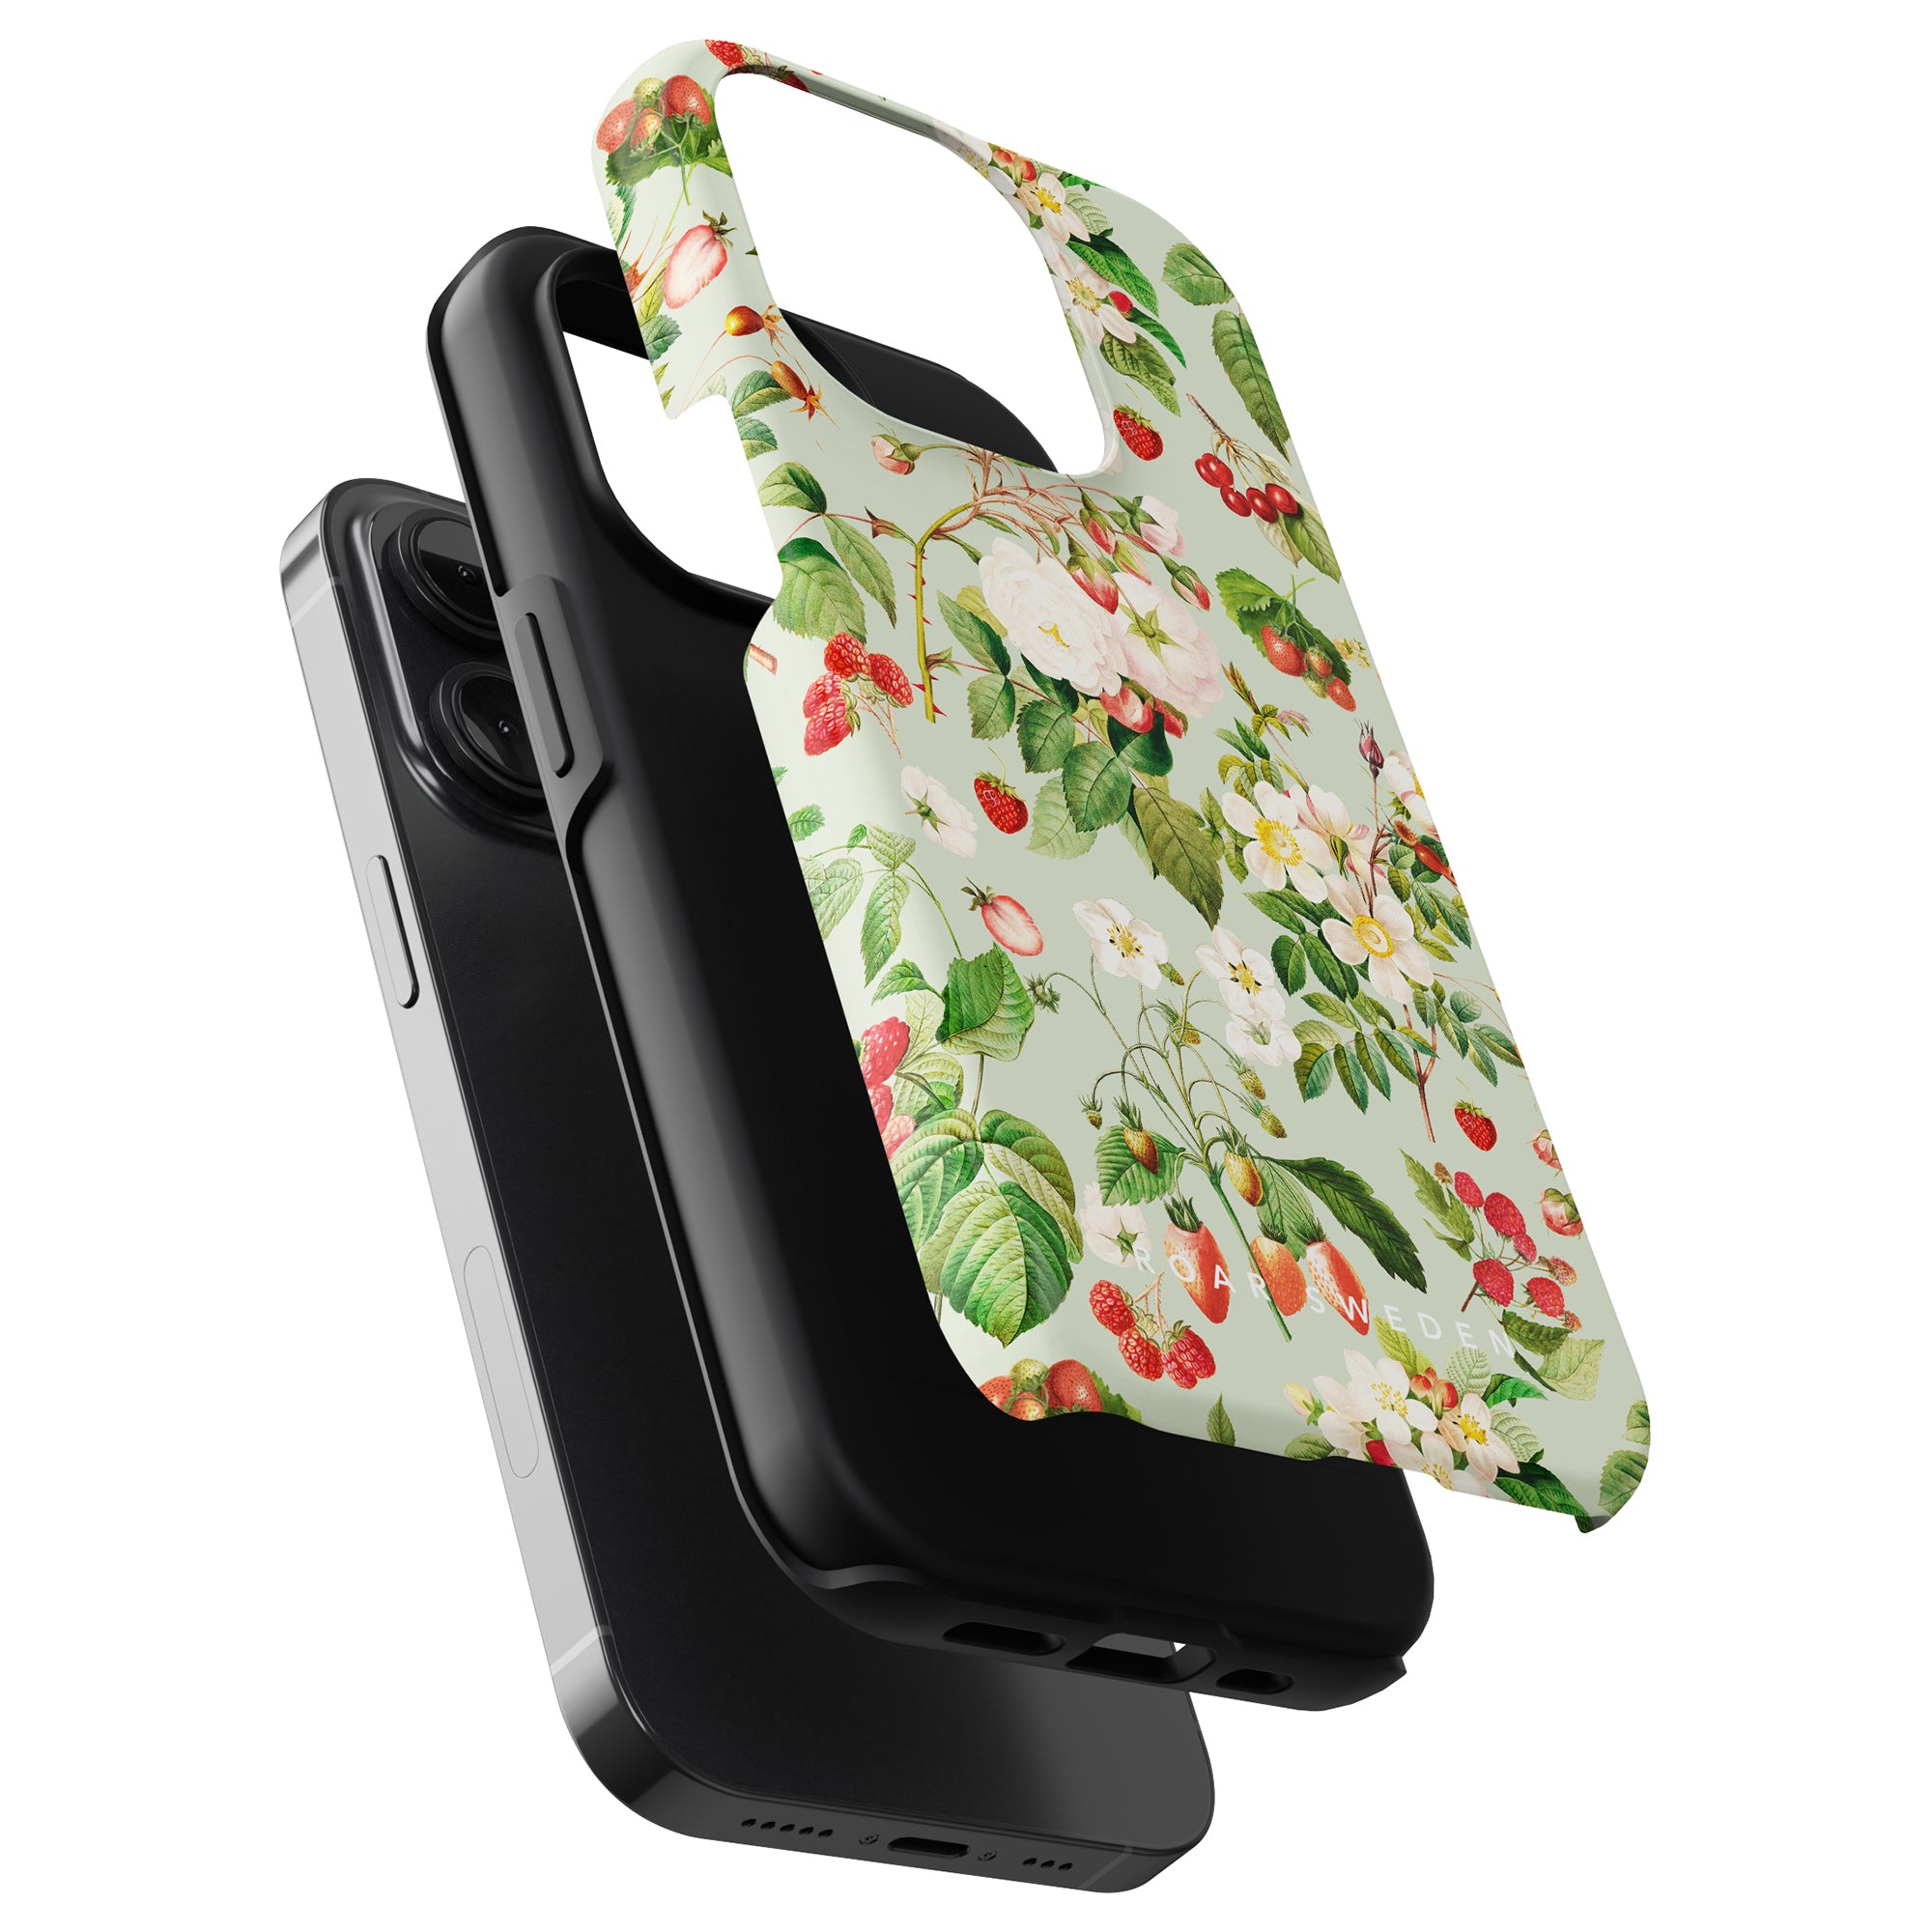 Two Tasty Garden - Tough Cases, one with an organic floral design and the other in solid black, positioned back to back.